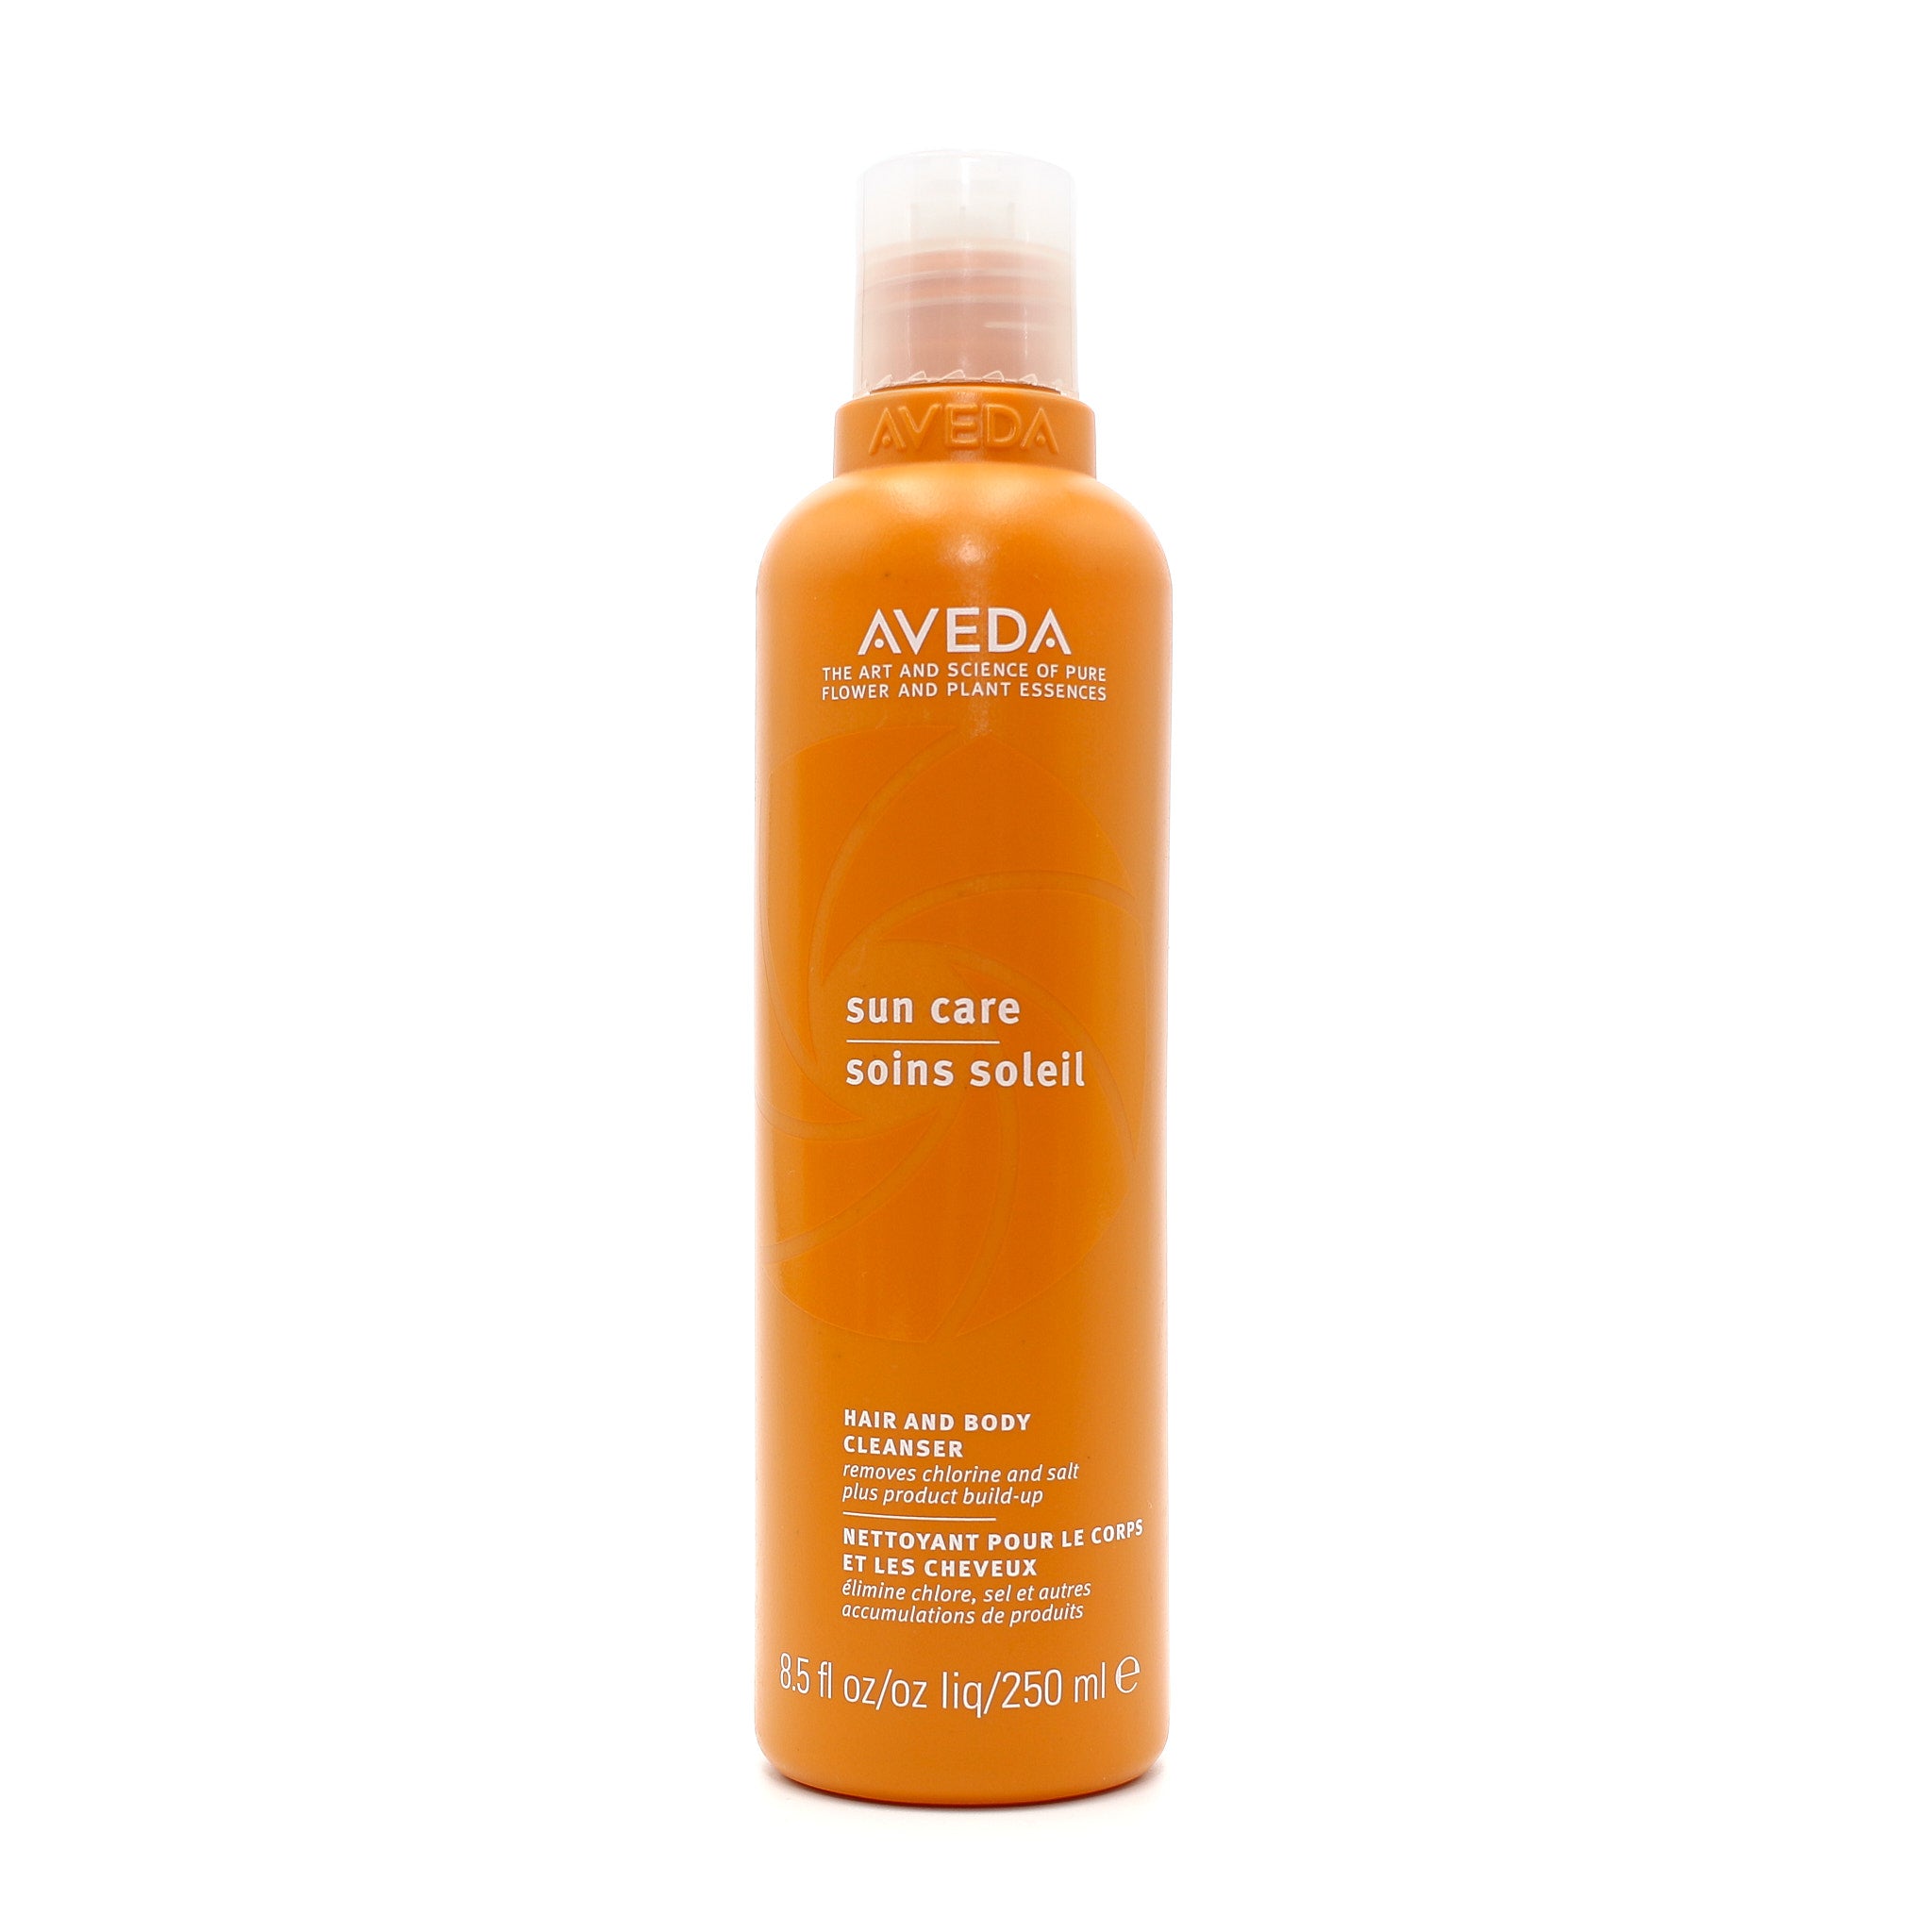 AVEDA Sun Care Hair and Body Cleanser 8.5 oz